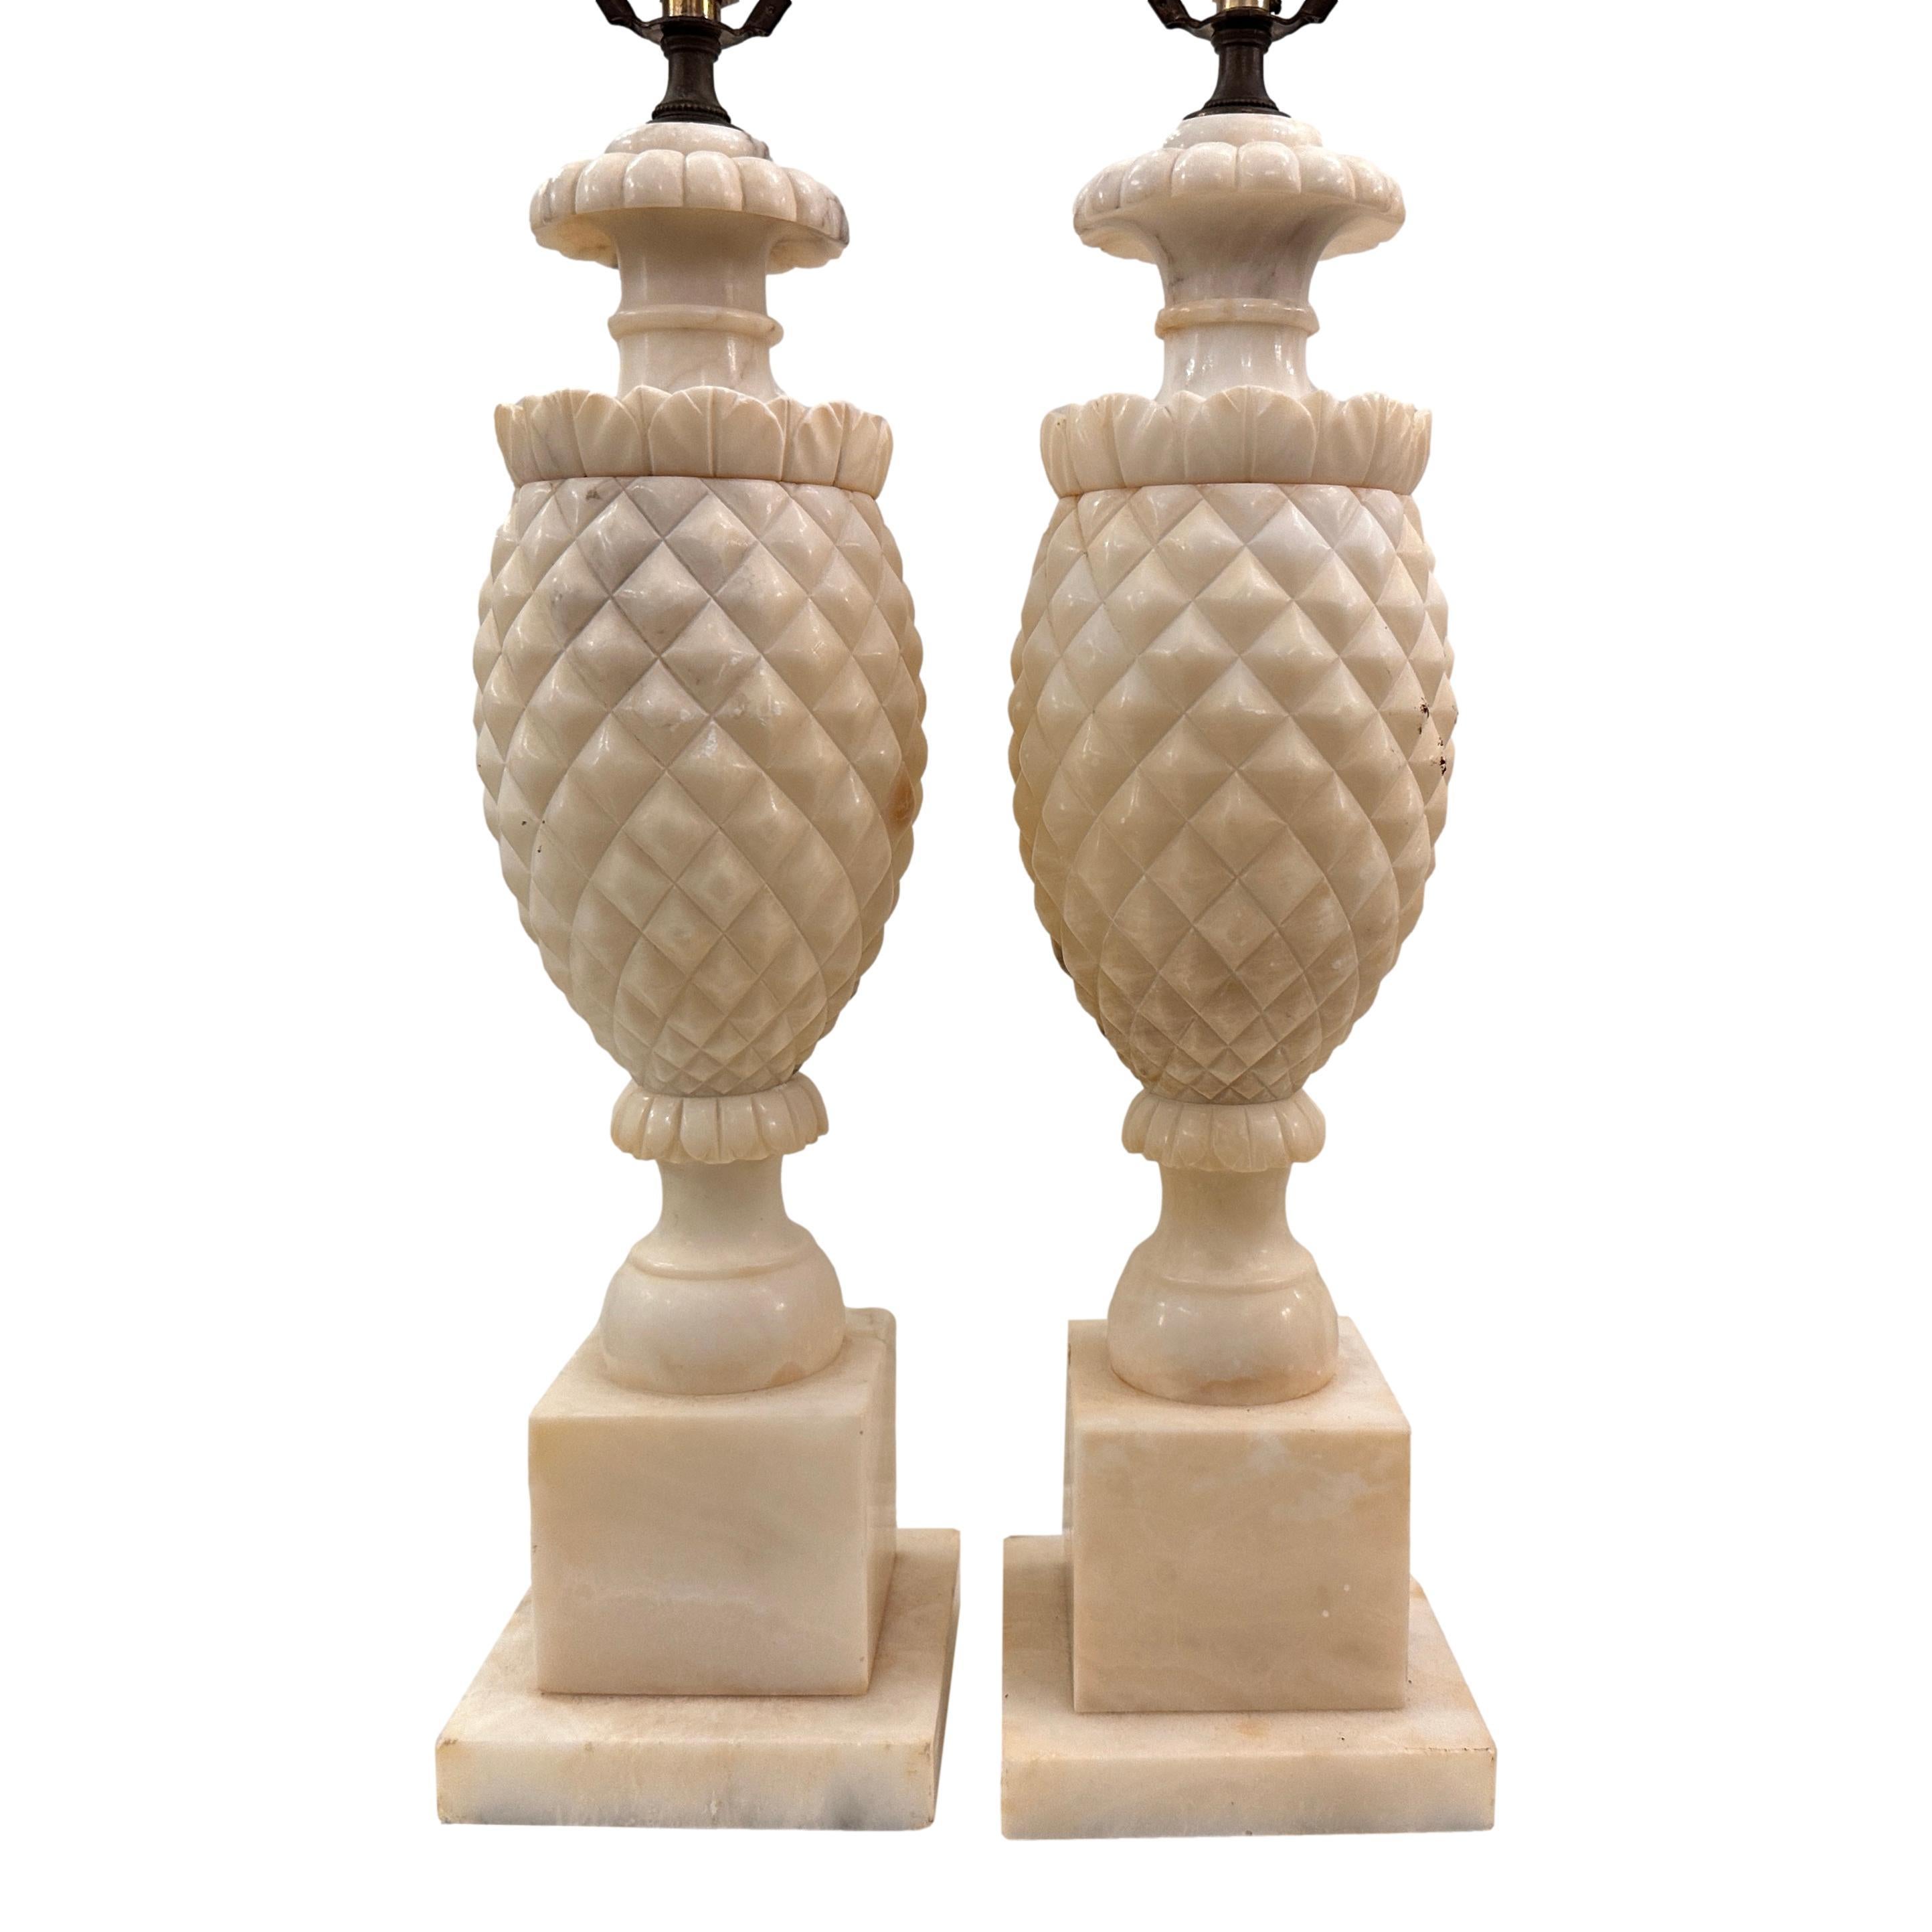 Pair of Italian circa 1950's carved alabaster lamps.

Measurements:
Height of body: 18